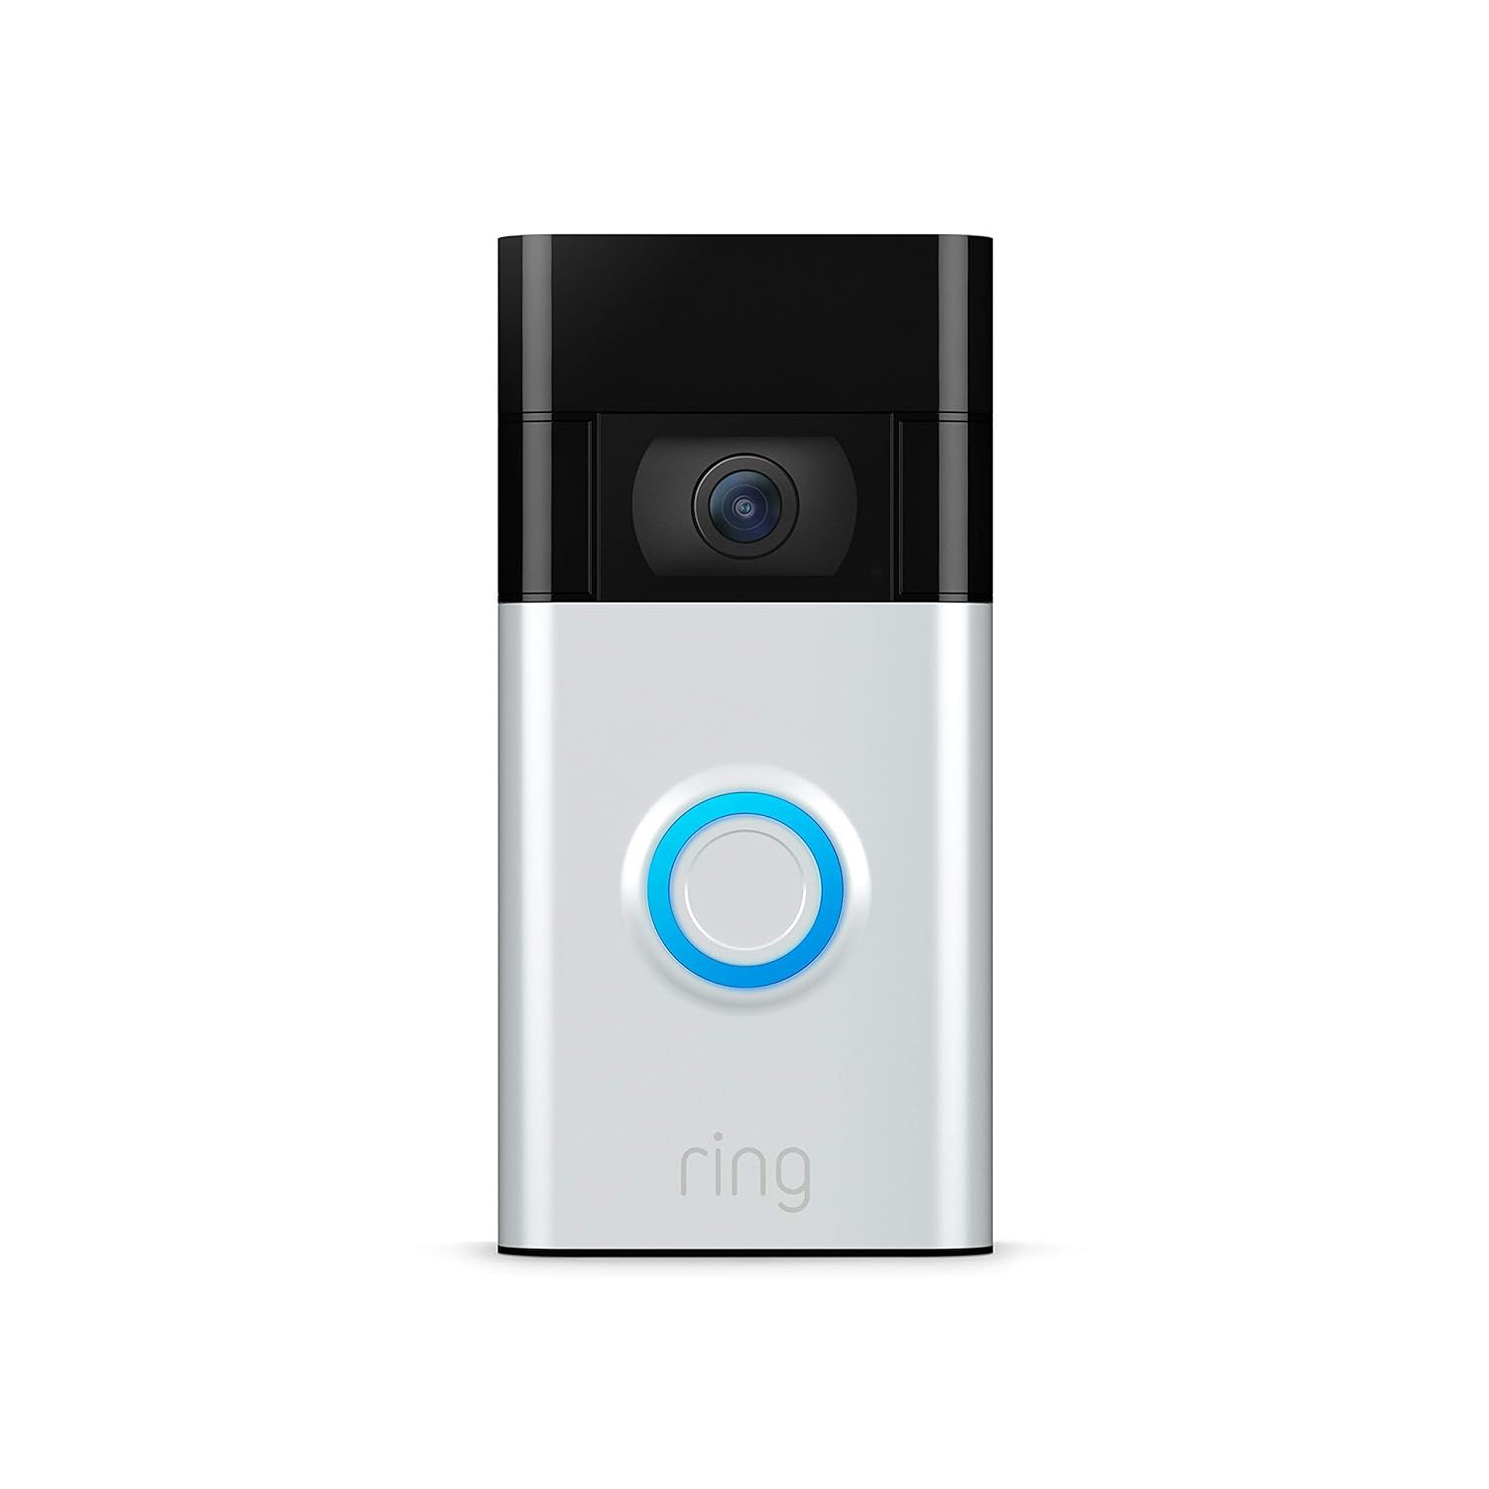 Ring Video Doorbell - 1080p HD video, improved motion detection, easy installation